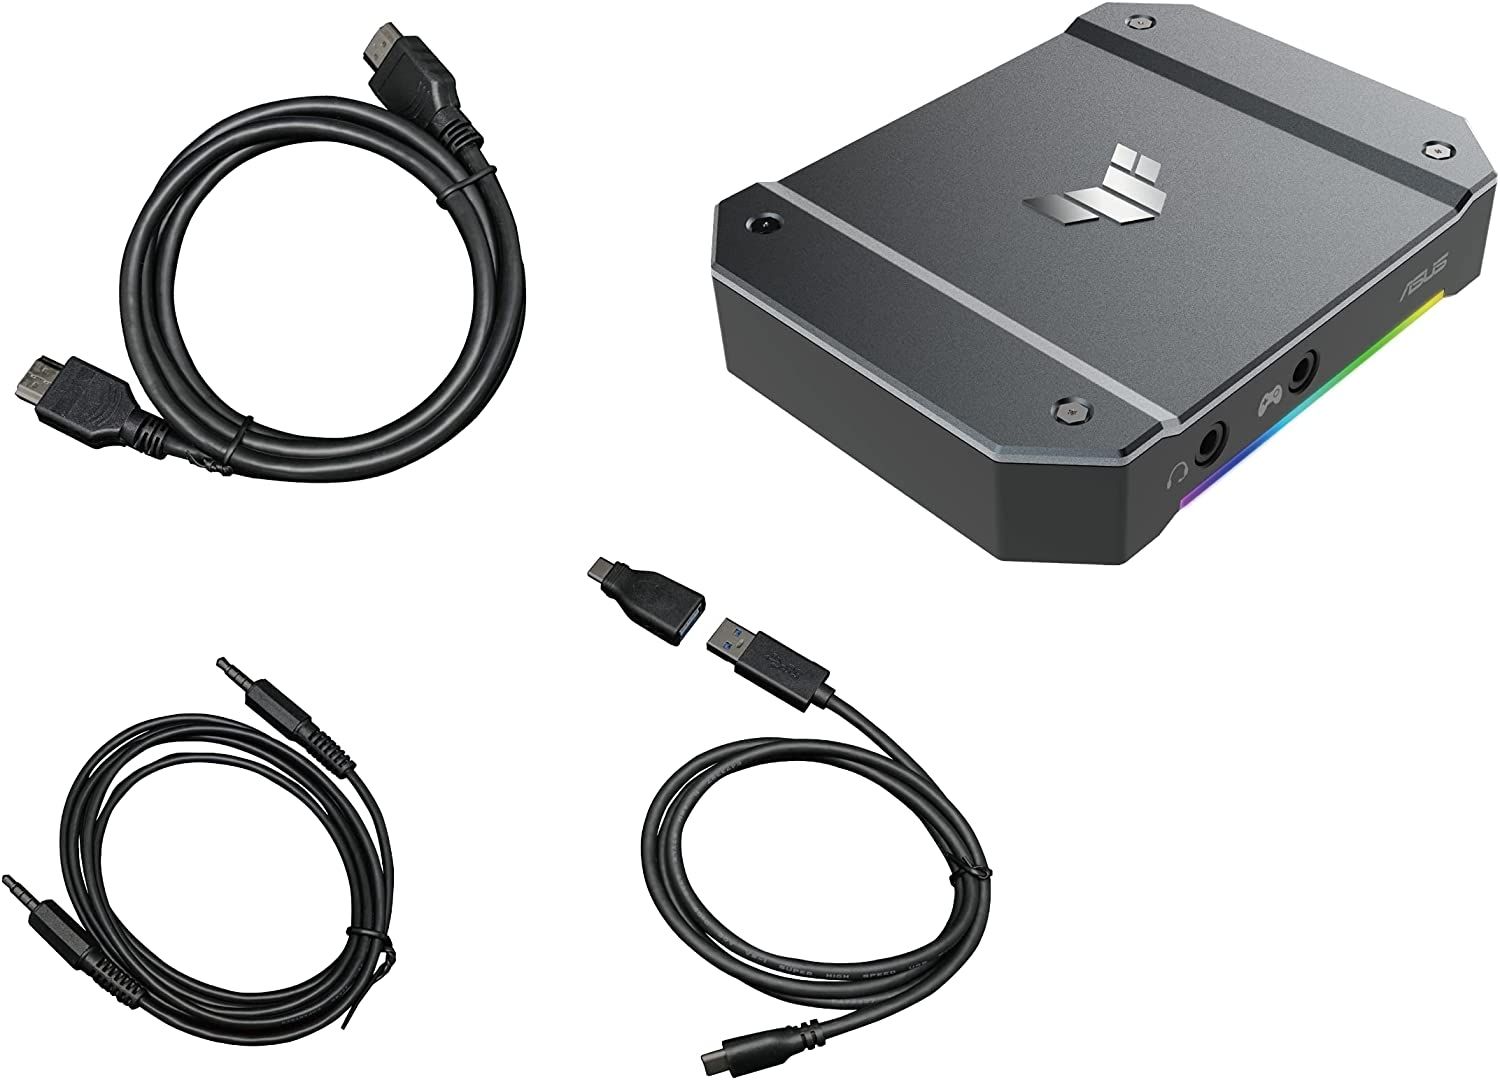 The in-box accessories of ASUS TUF Gaming Video Capture Card